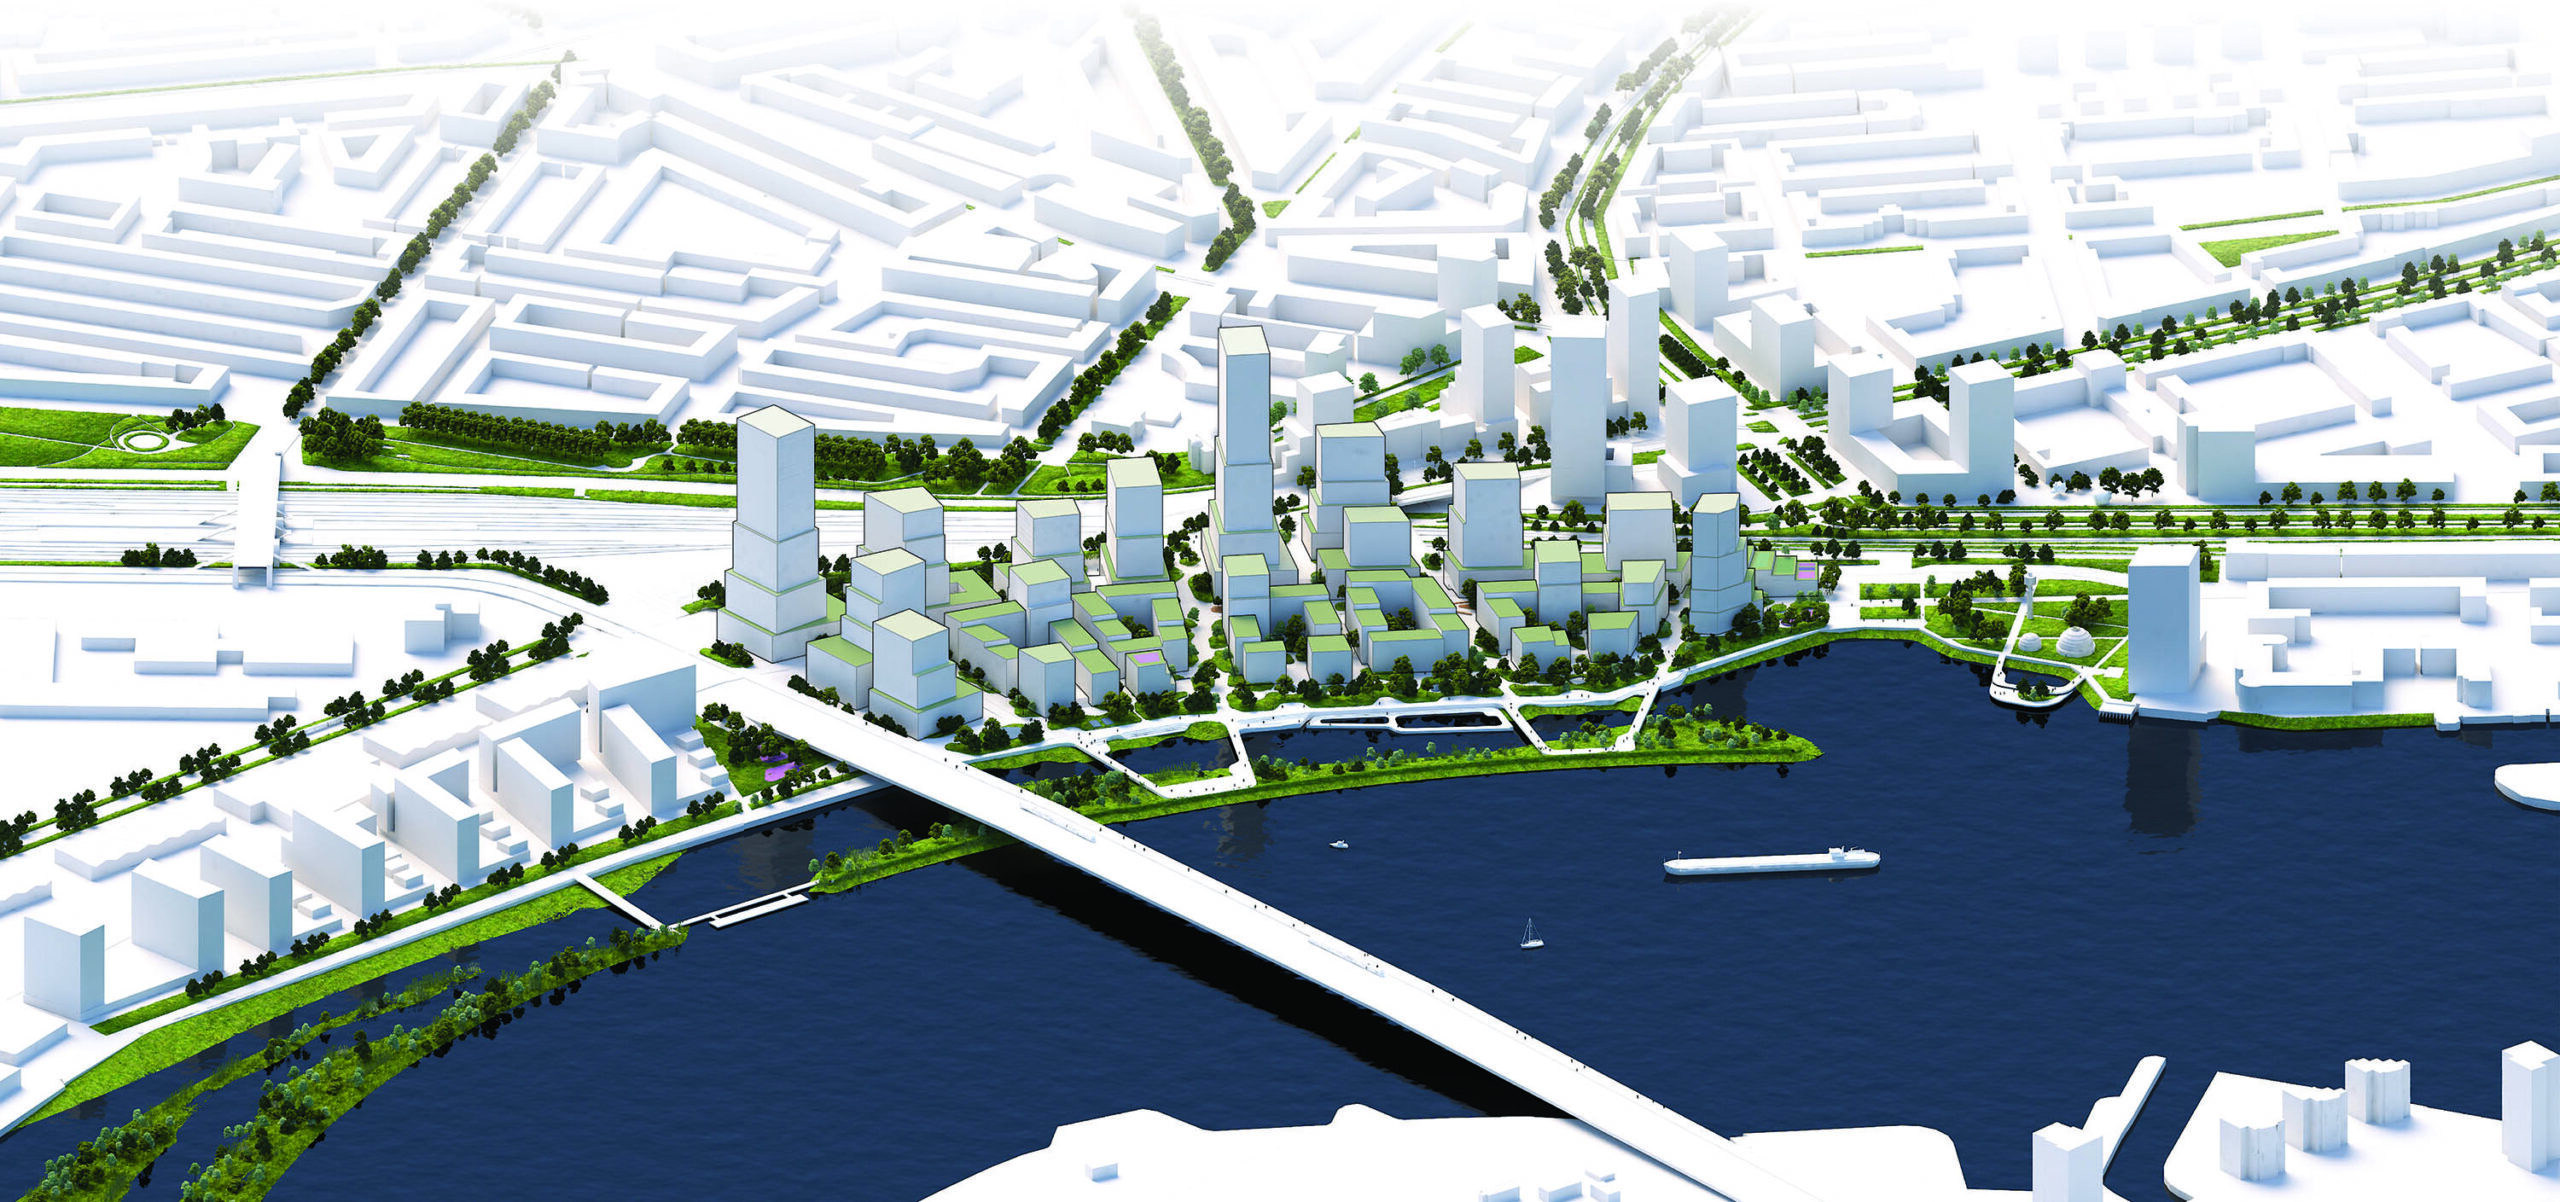 Artist's impression of Feyenoord City 2.0 and the Waterfront. A new centre in the city. Concept by OMA and LOLA